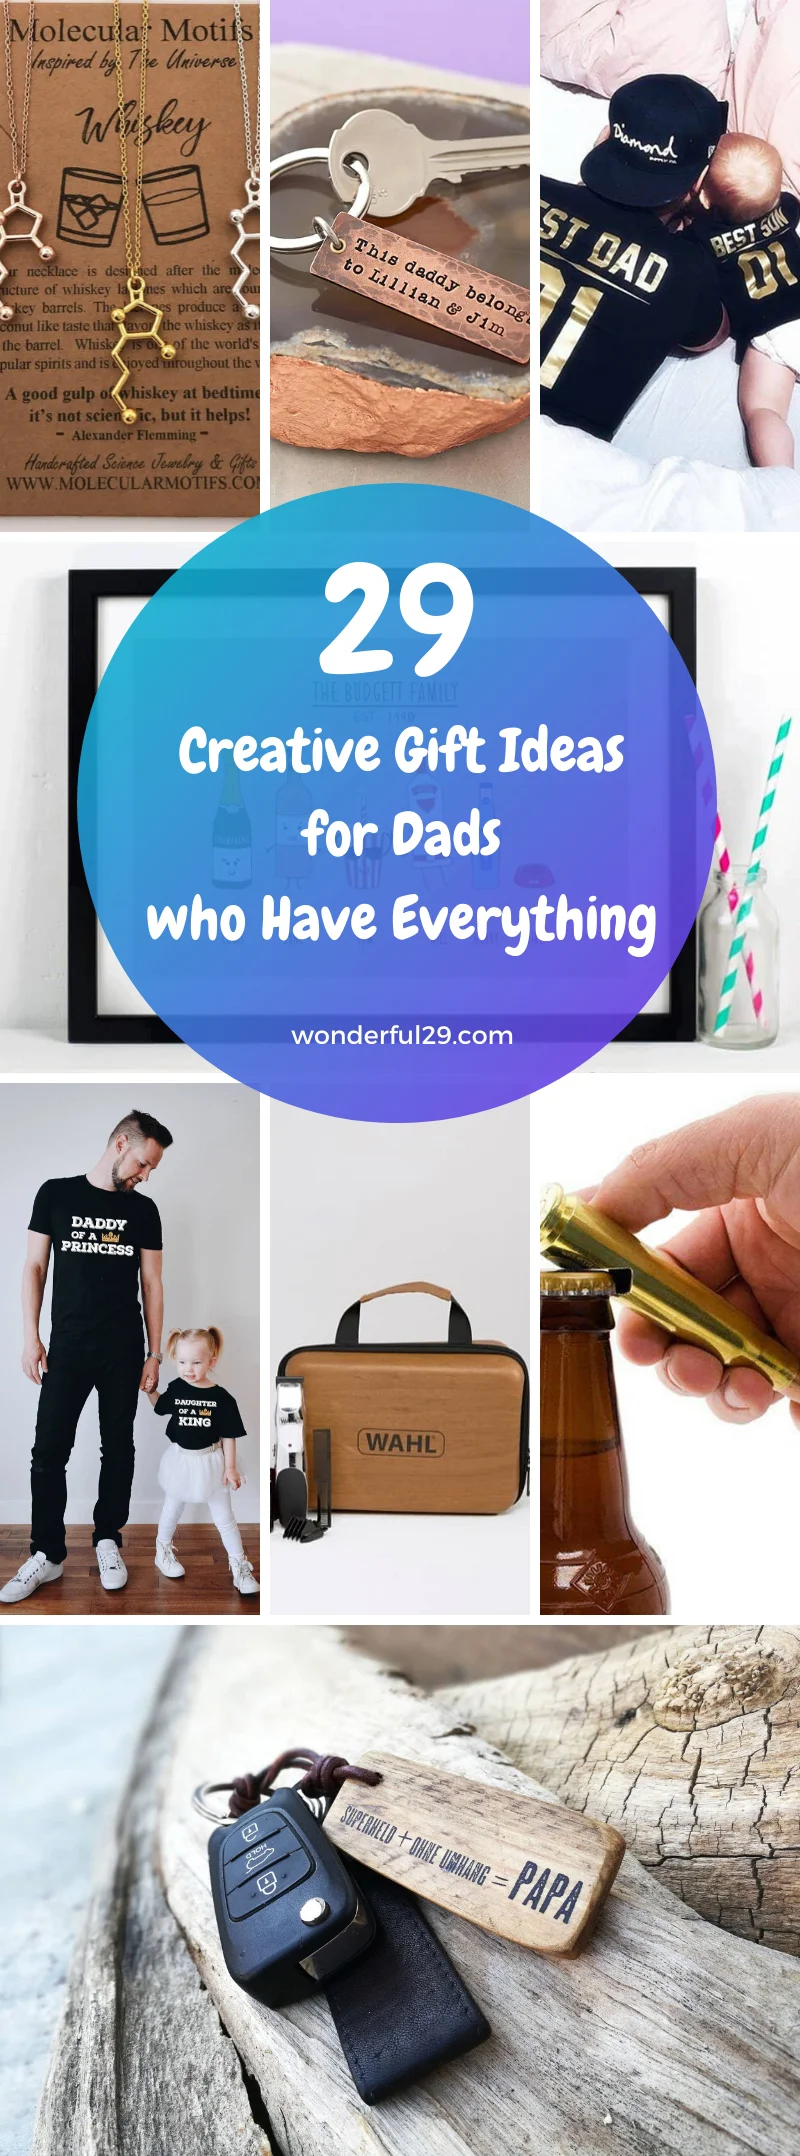 The Best Father's Day Gifts for Cat Dads | BeChewy